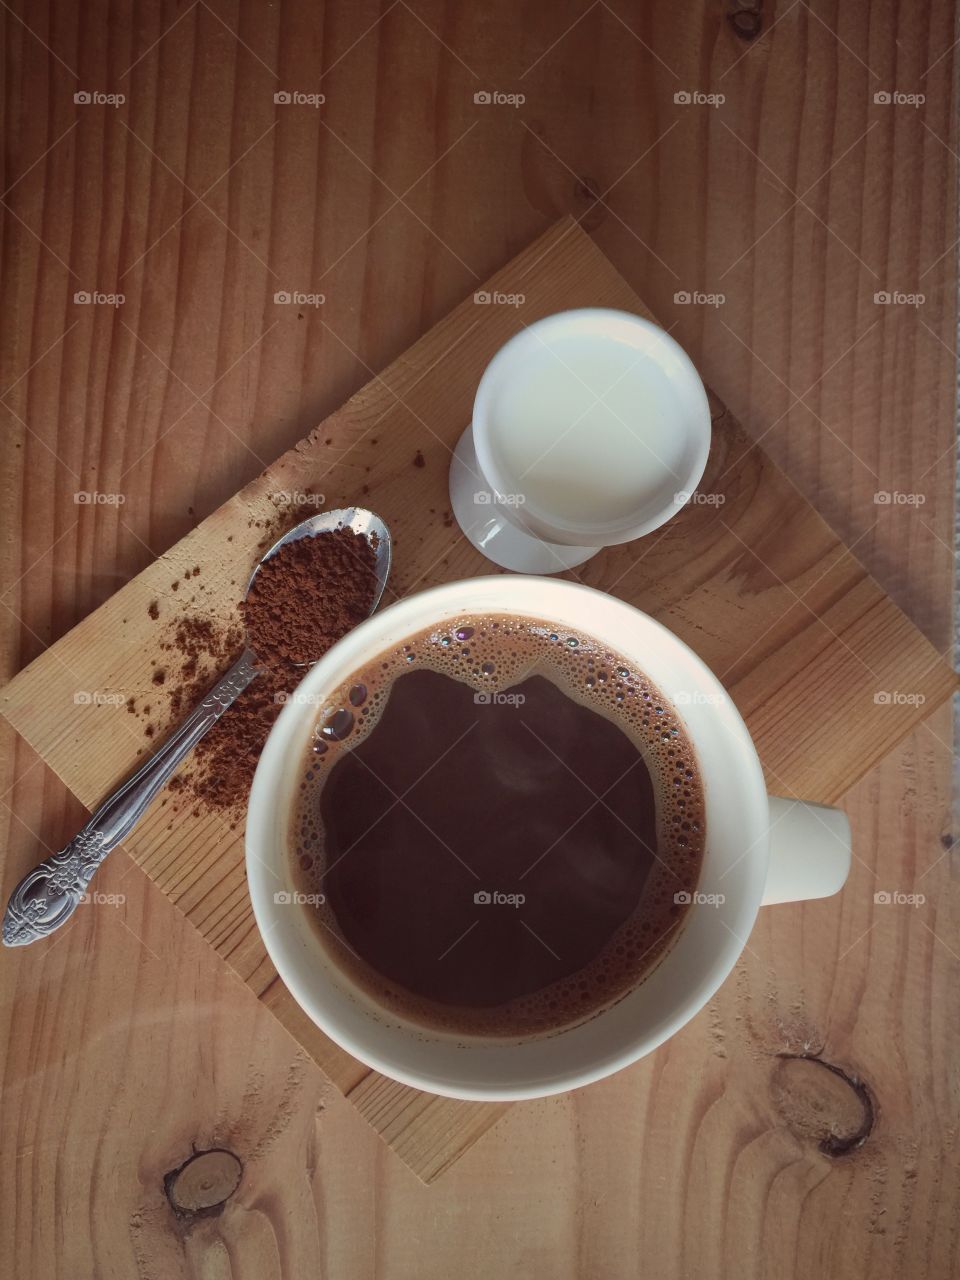 Overhead view of coffee cup and milk